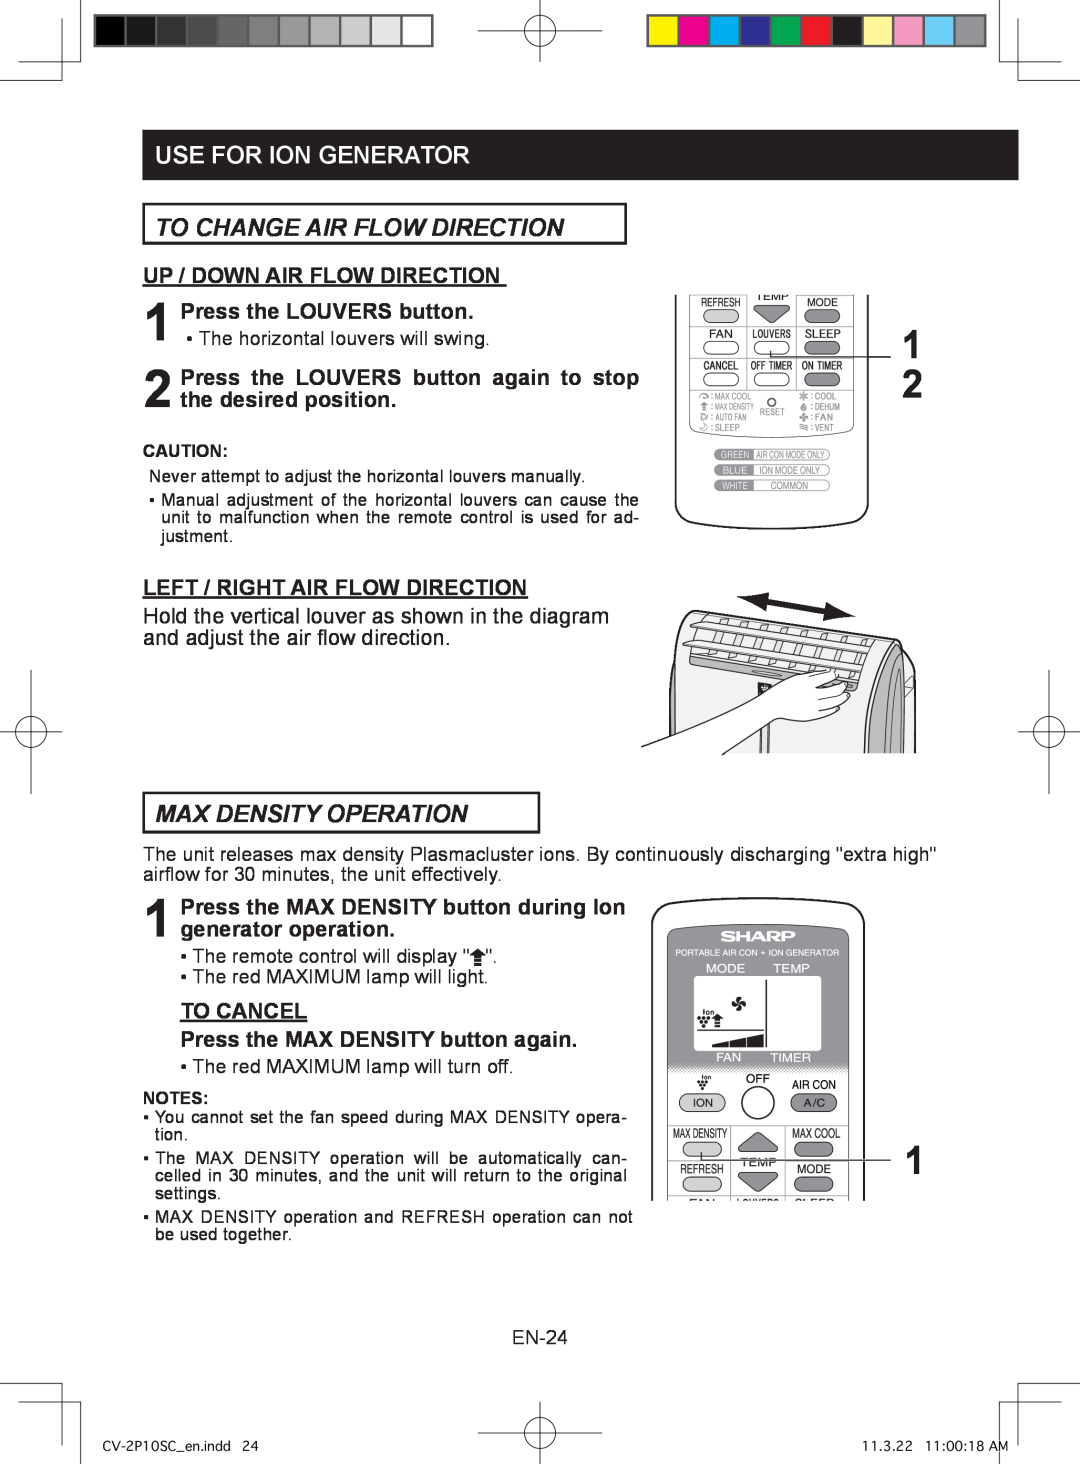 Sharp CV-2P10SC operation manual Max Density Operation, TO CANCEL Press the MAX DENSITY button again, Use For Ion Generator 